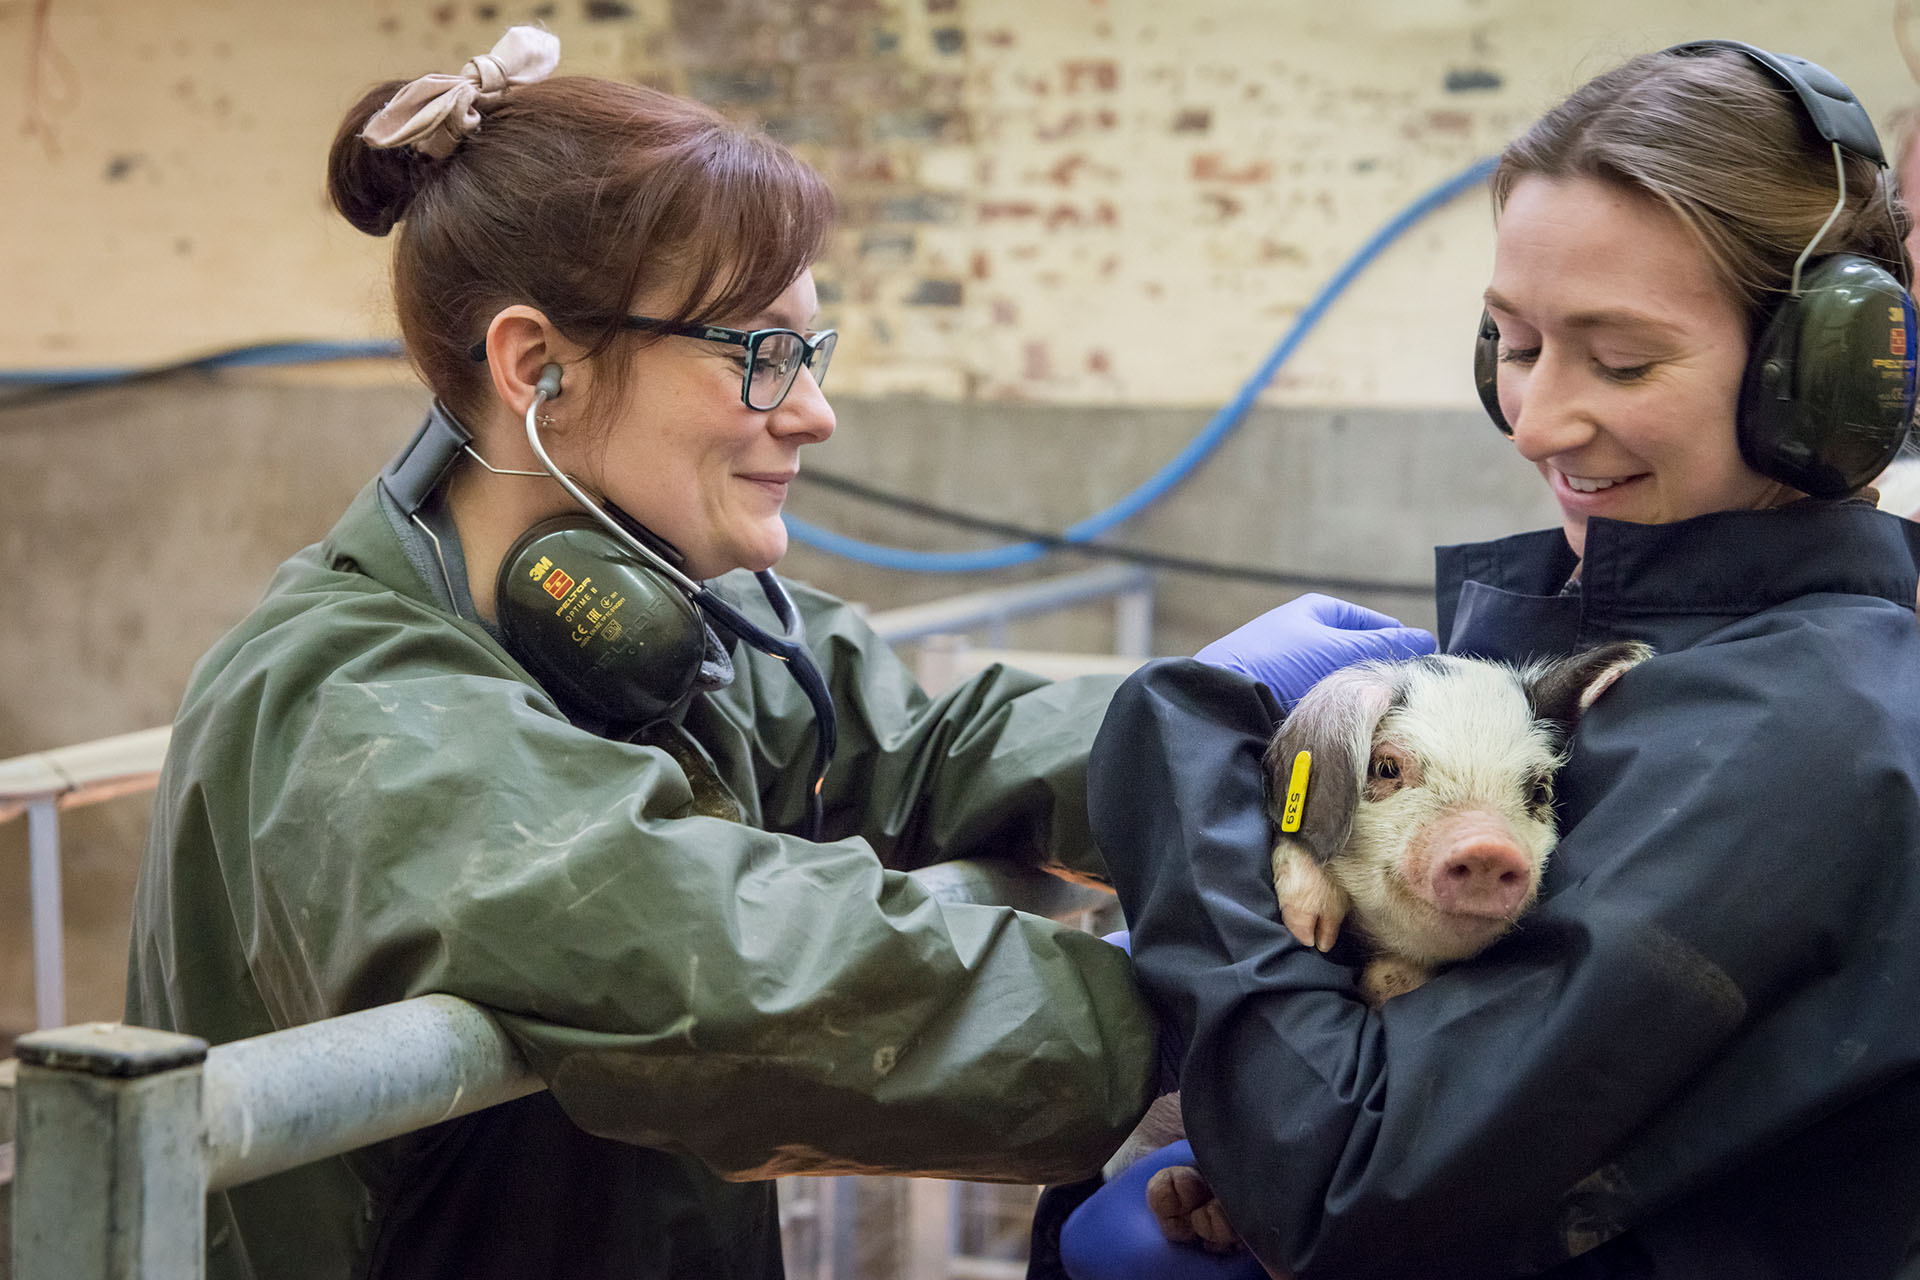 Students working with piglets